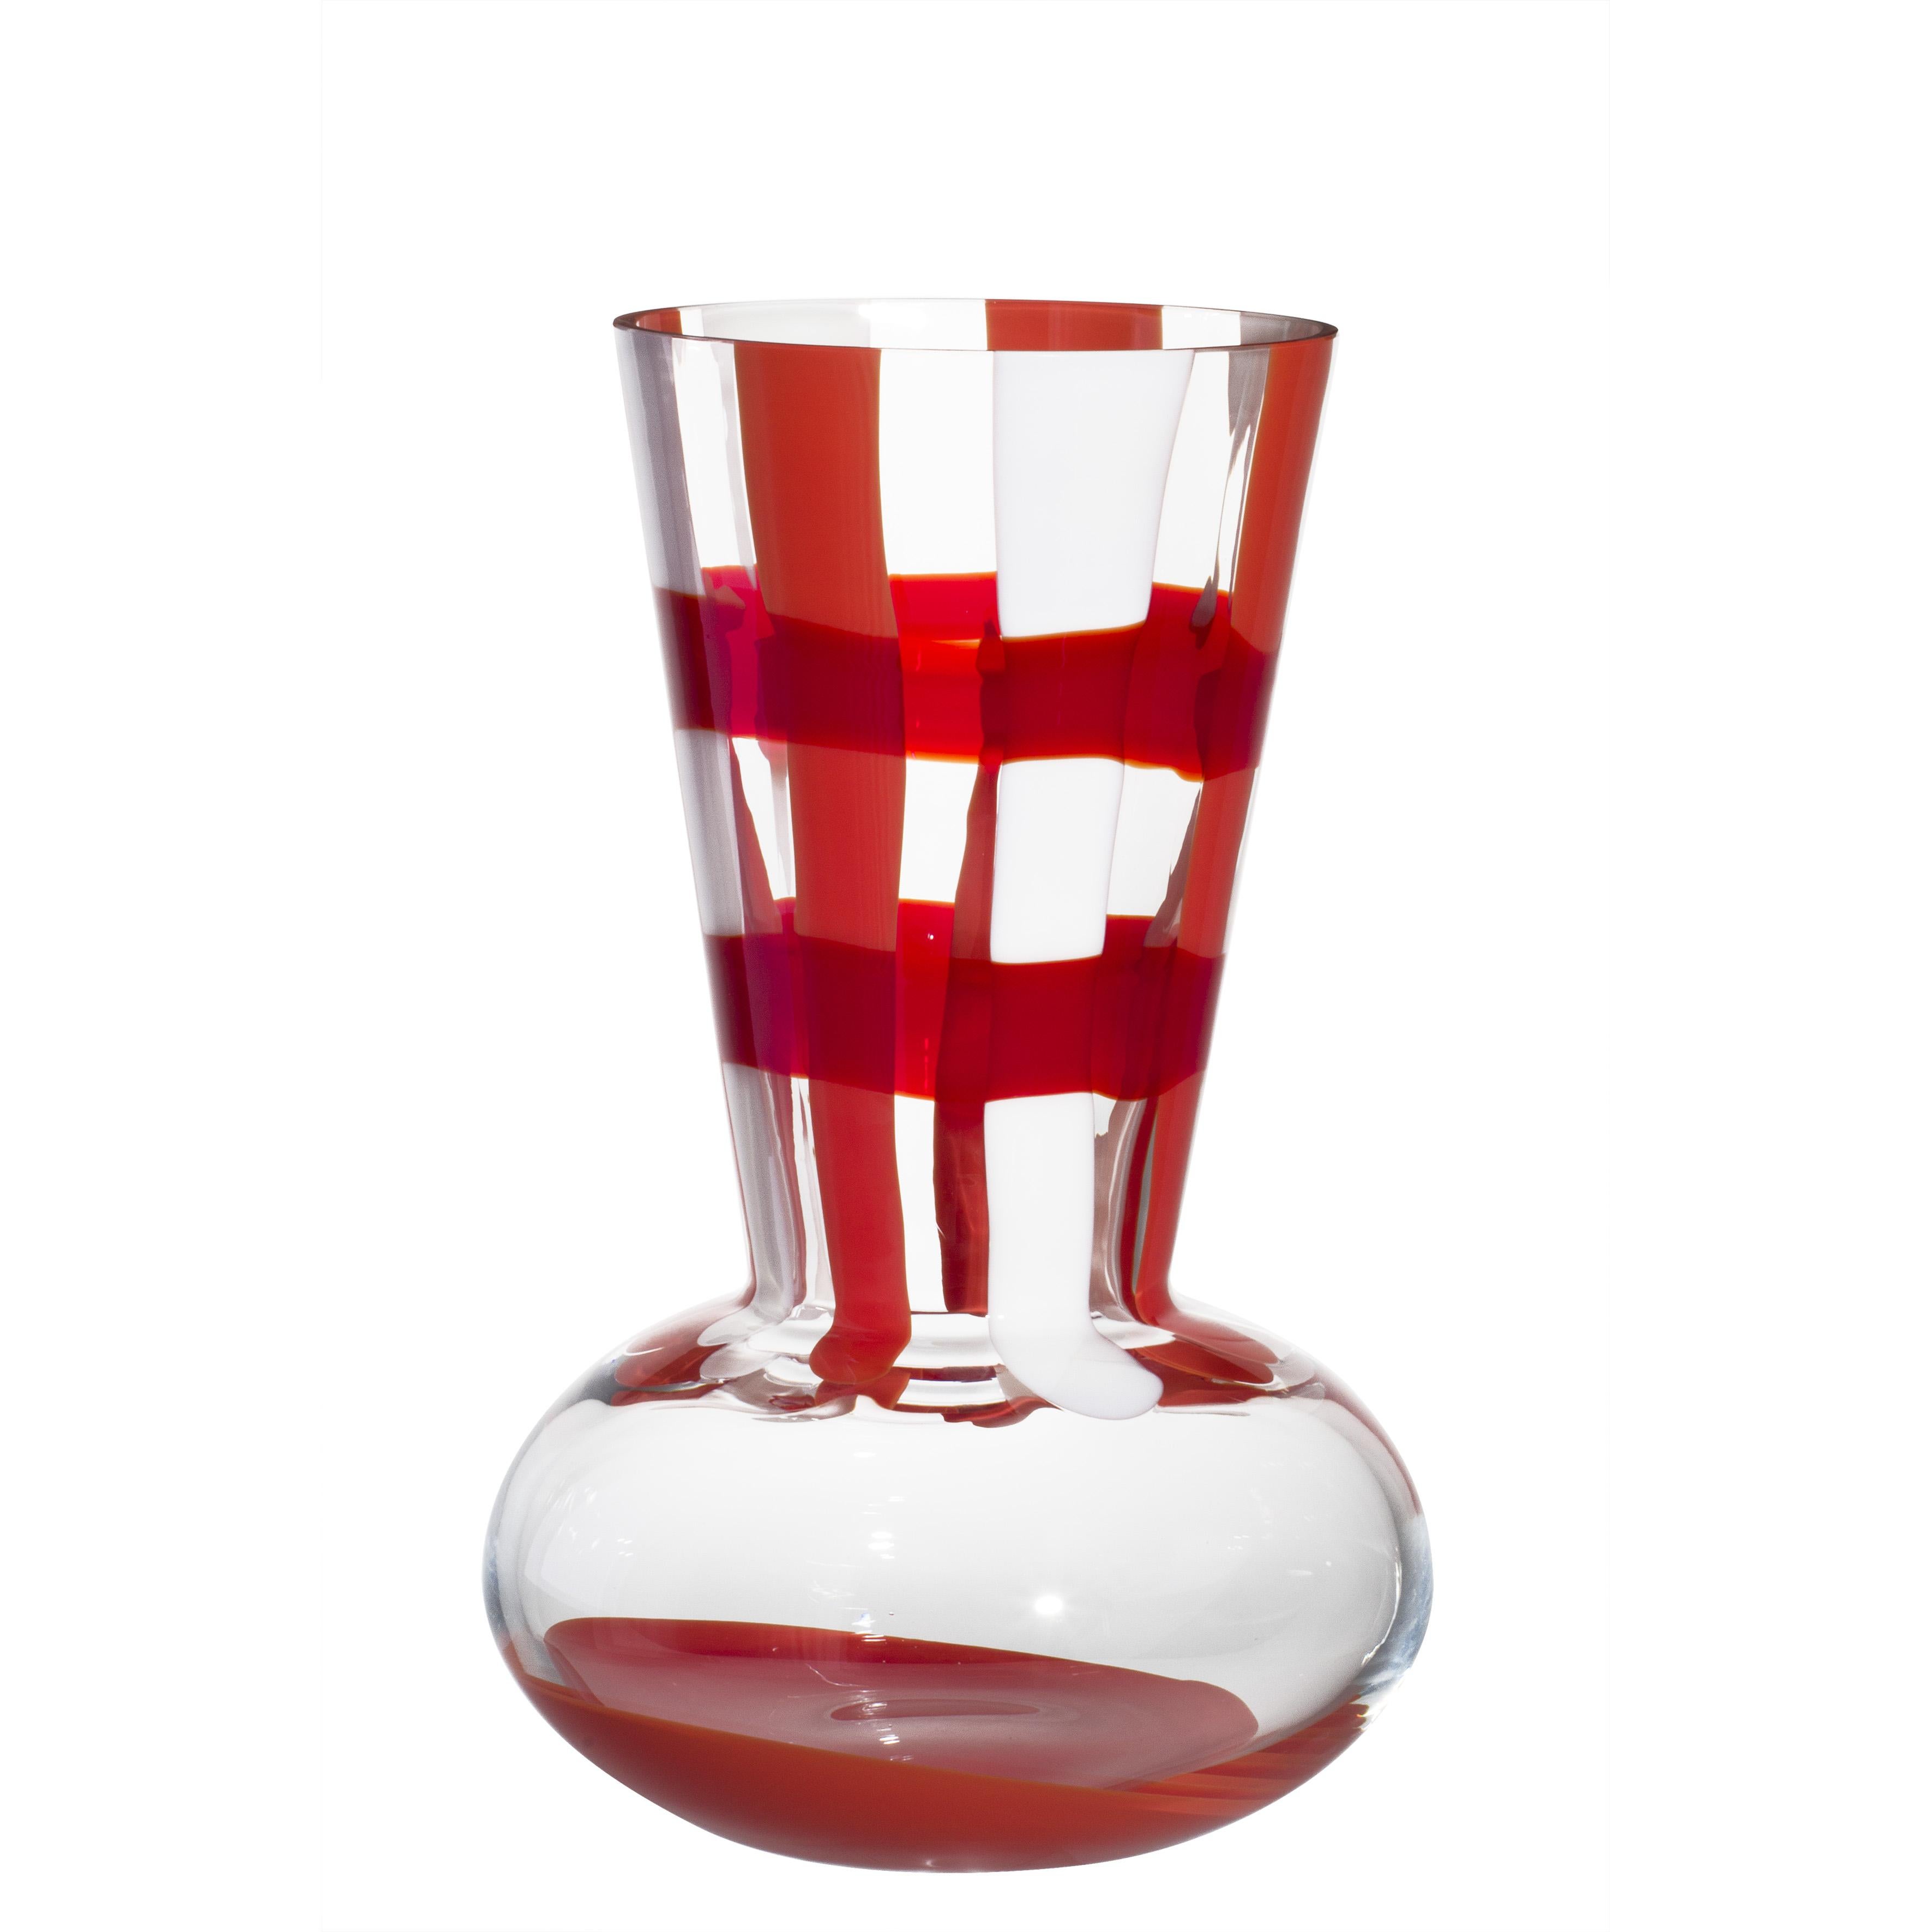 Medium Troncosfera Vase in Orange, Ivory and Red by Carlo Moretti For Sale